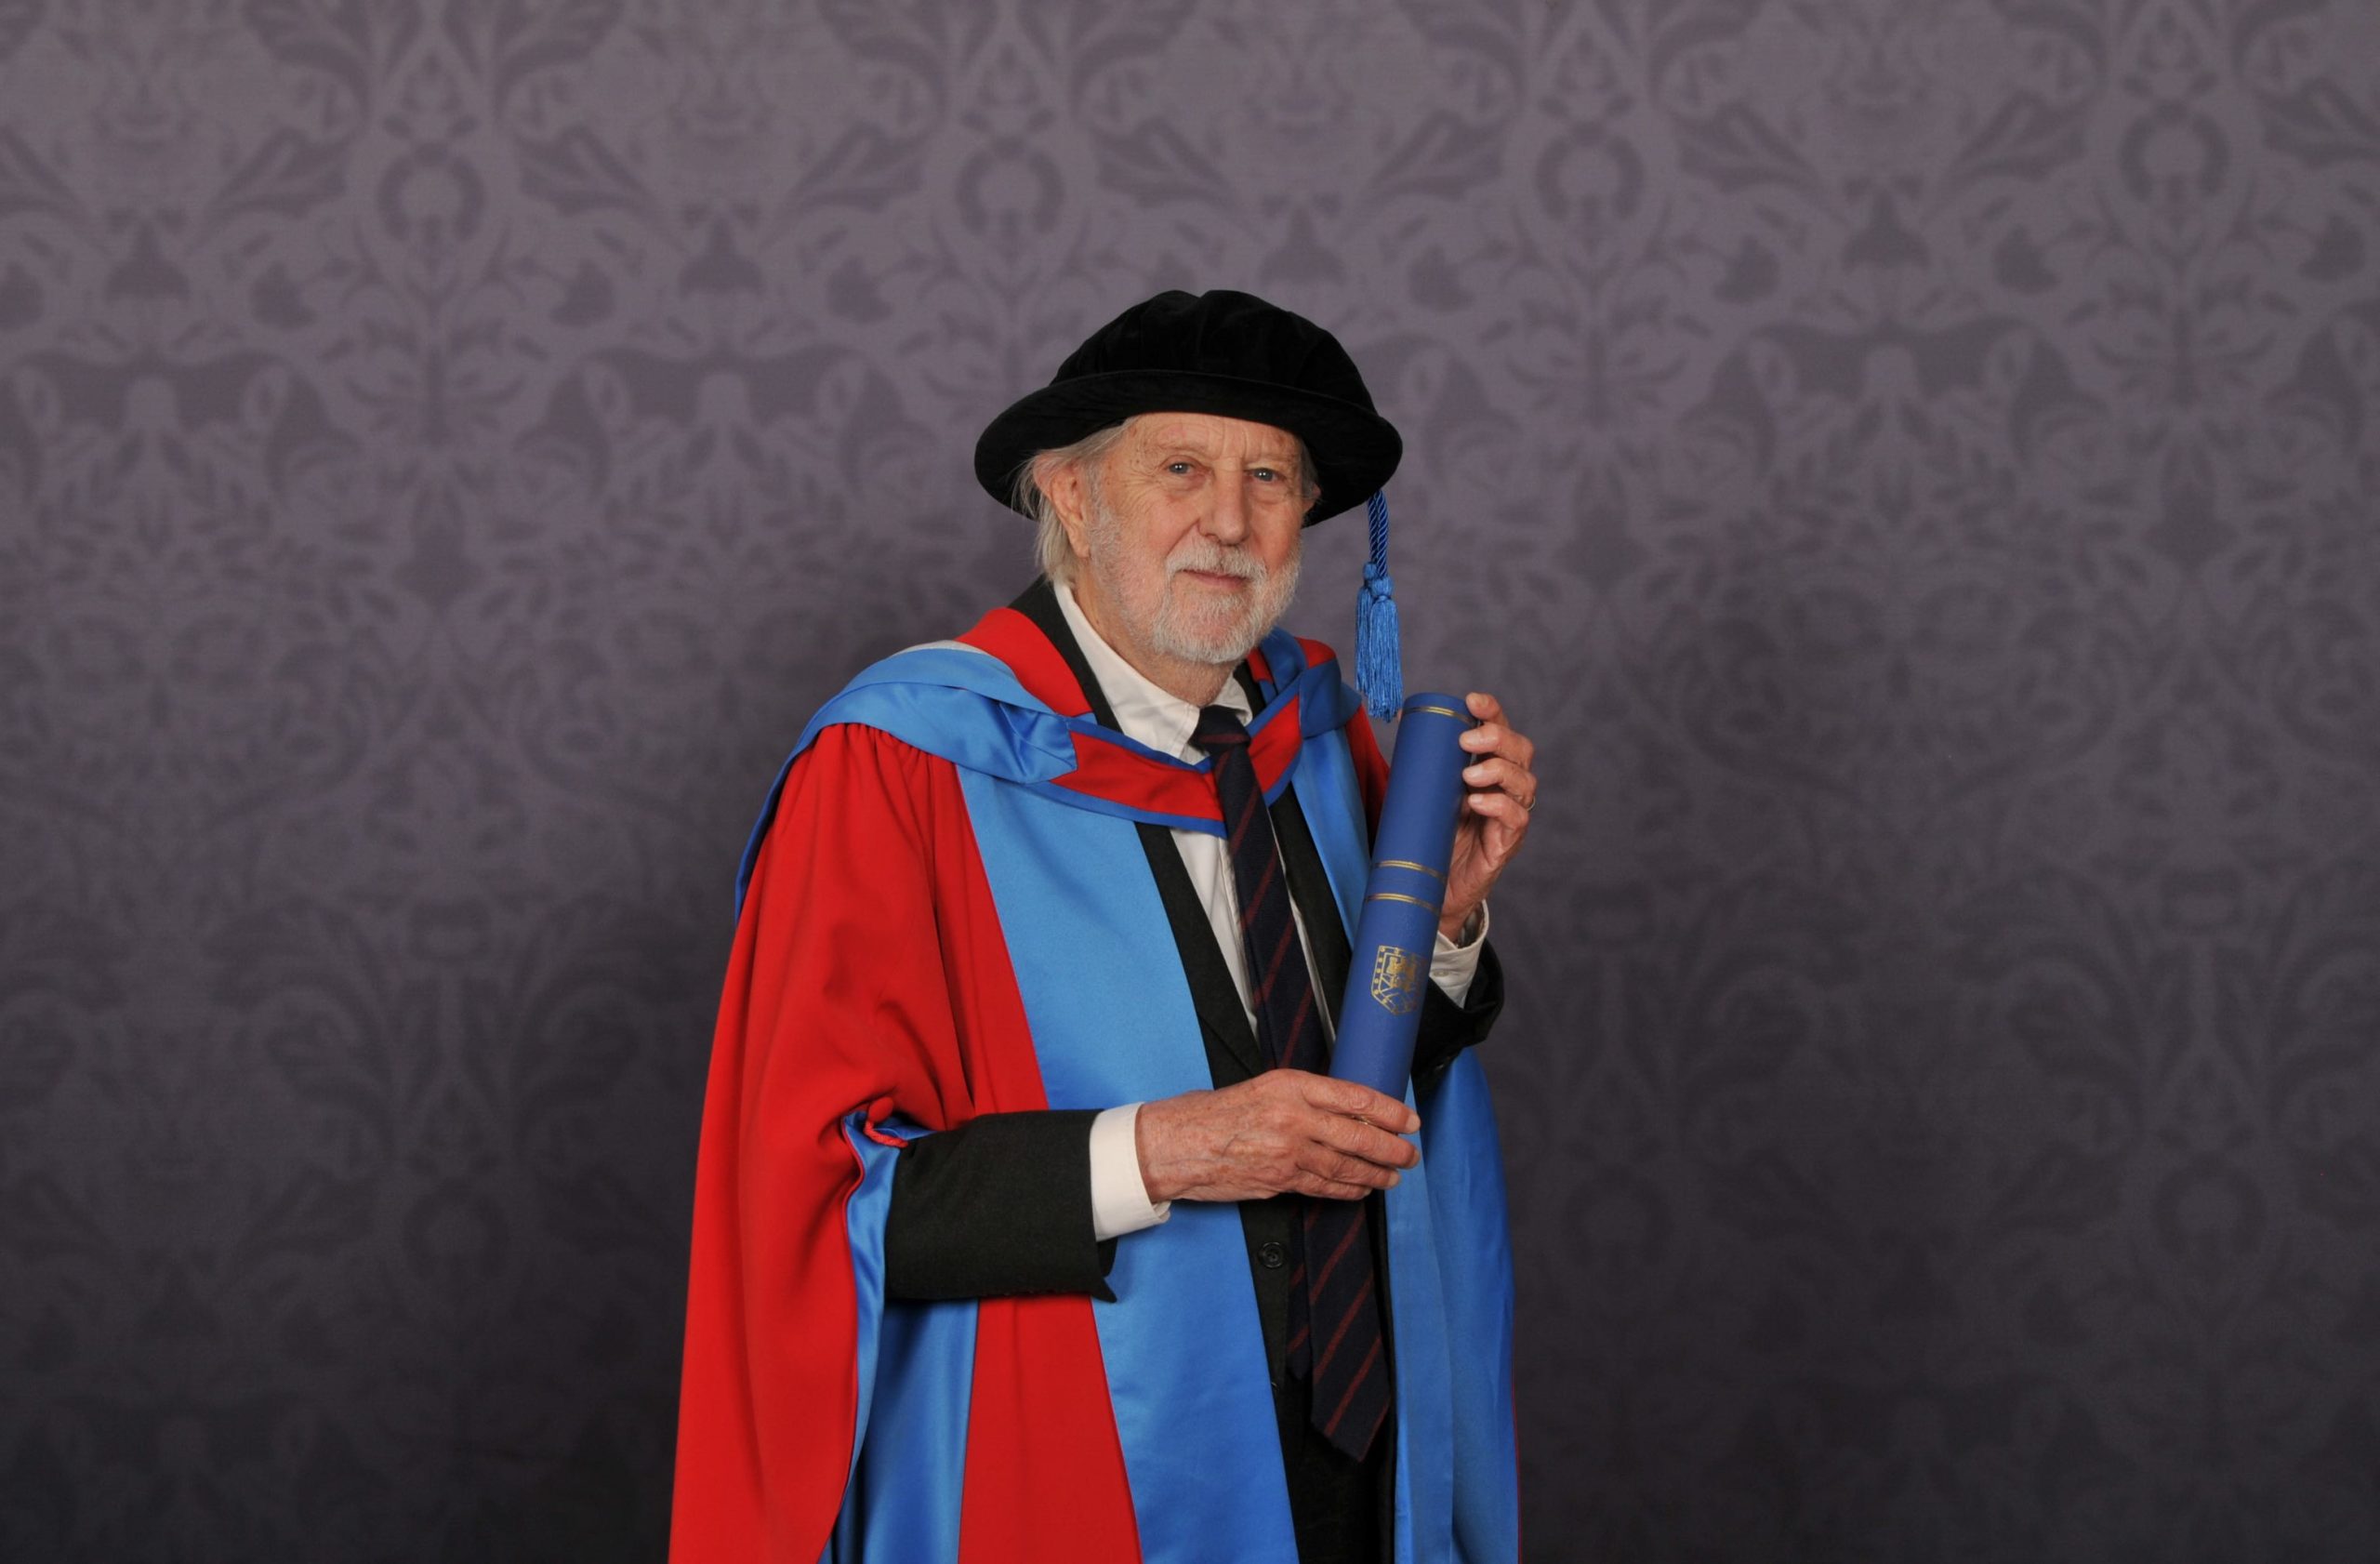 Lord David Puttnam Receives Honorary Doctorate from Exeter University